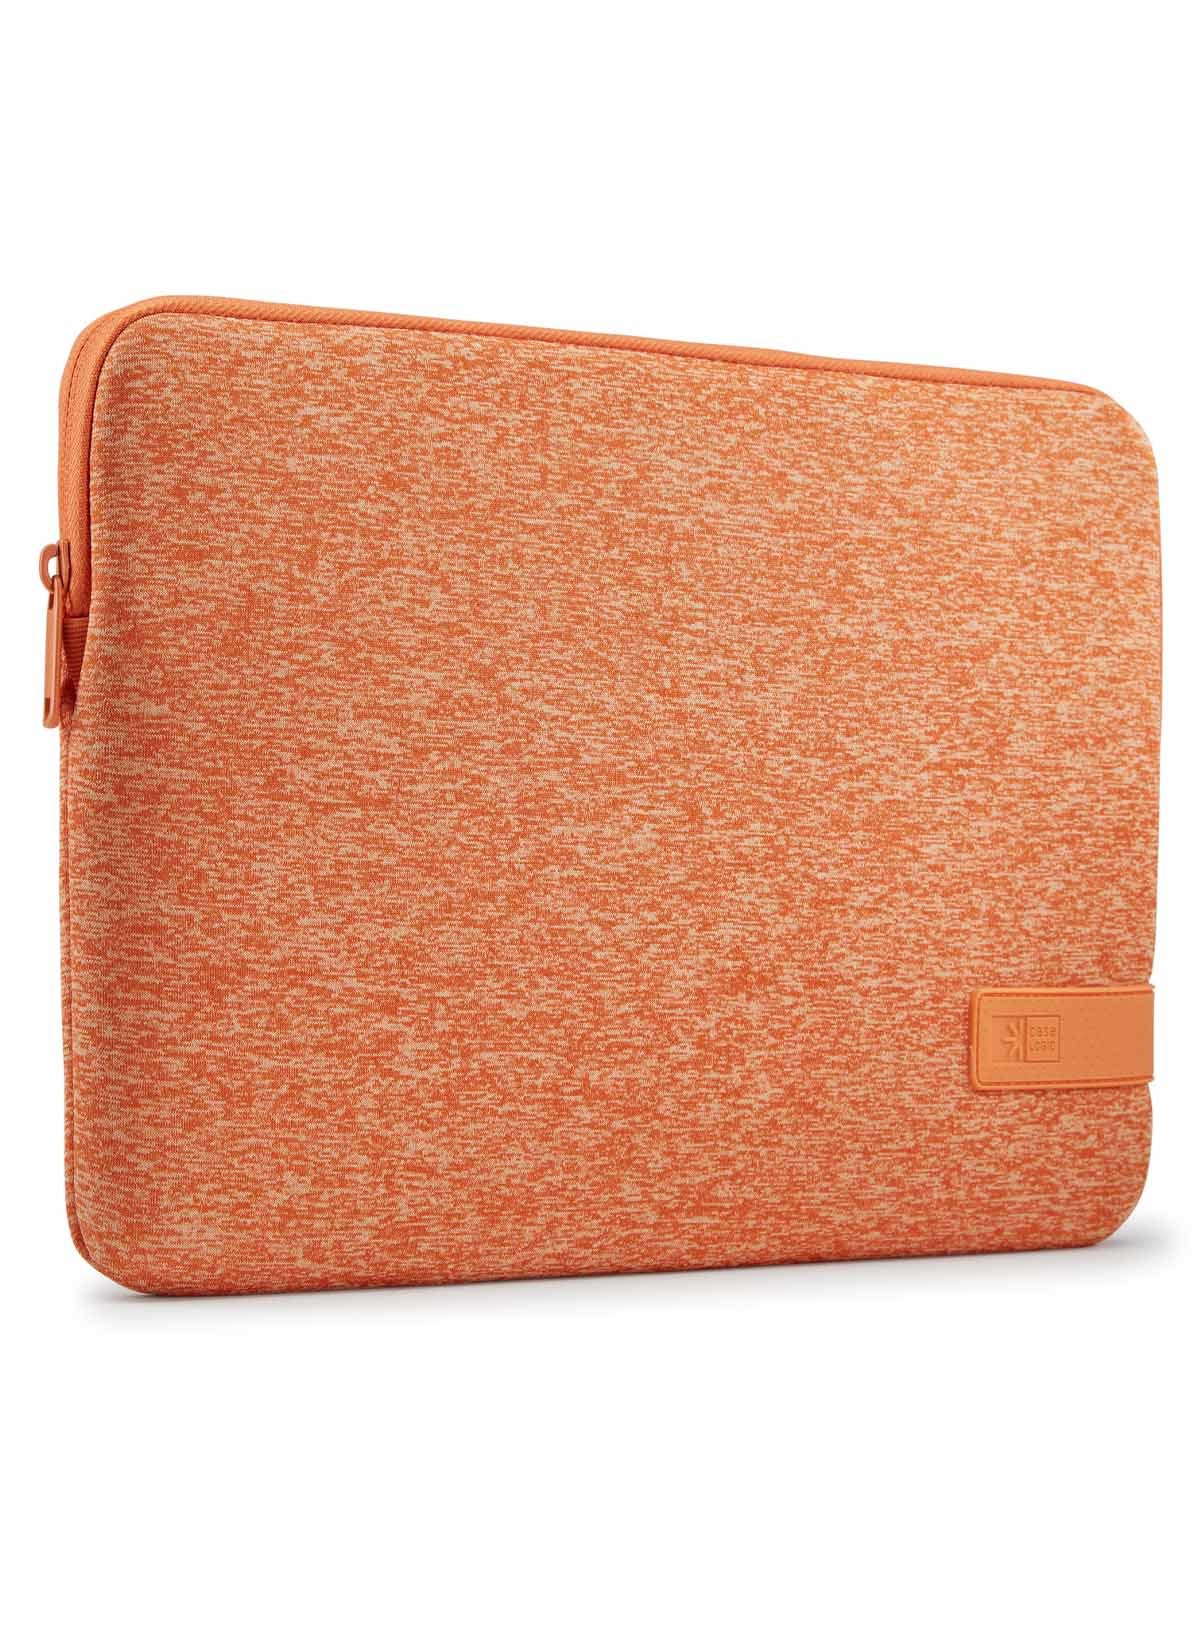 LOGIC Coral Universal Gold/Apricot Notebook Reflect für CASE Sleeve Polyester, Sleeve